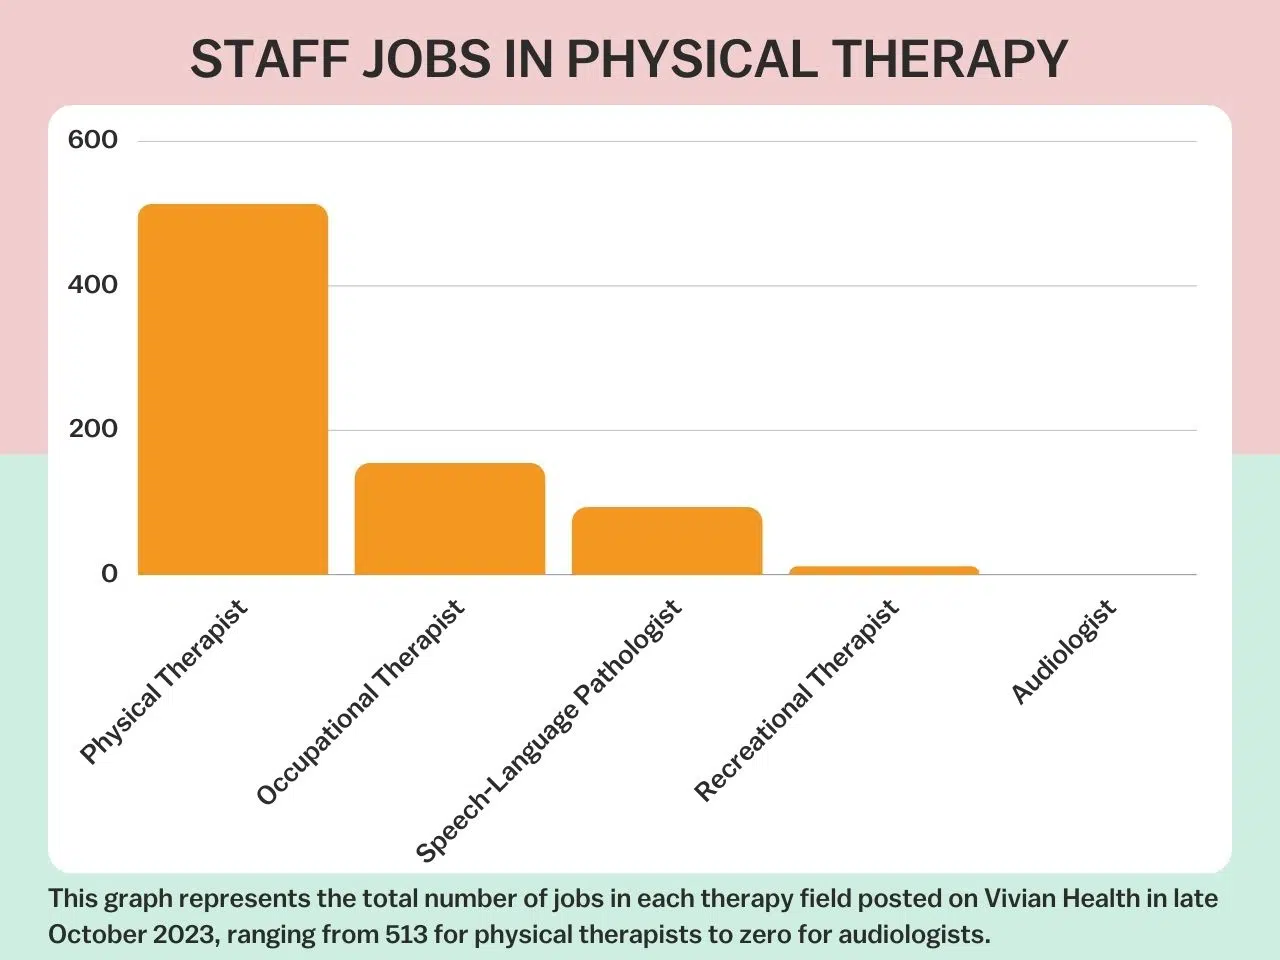 Staff Jobs by Physical Therapy Field